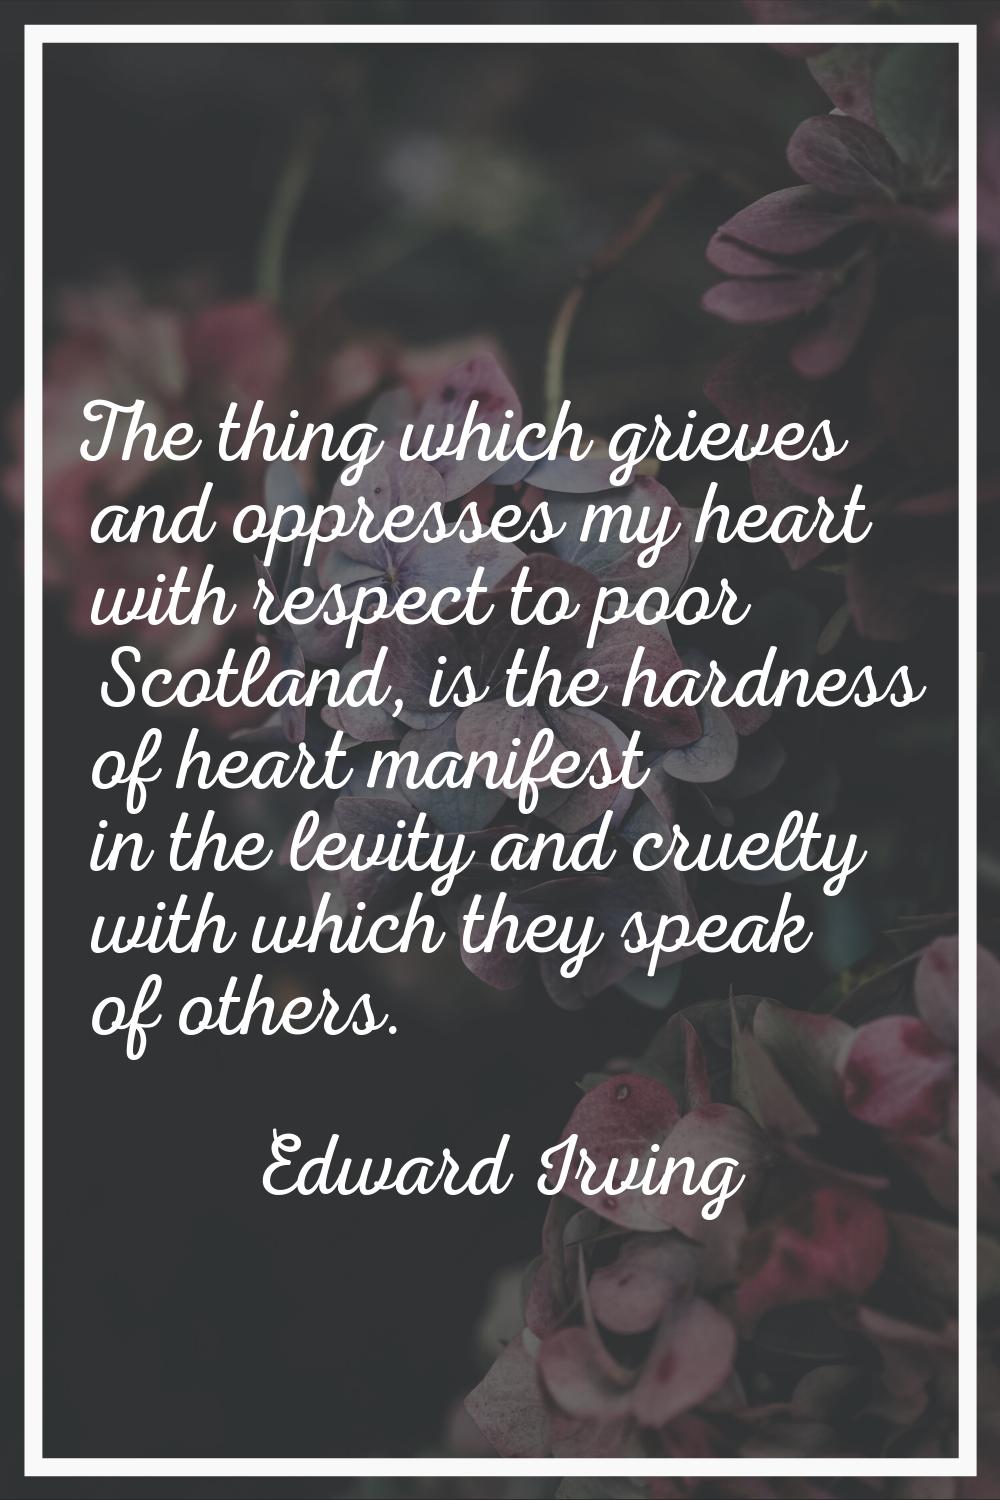 The thing which grieves and oppresses my heart with respect to poor Scotland, is the hardness of he